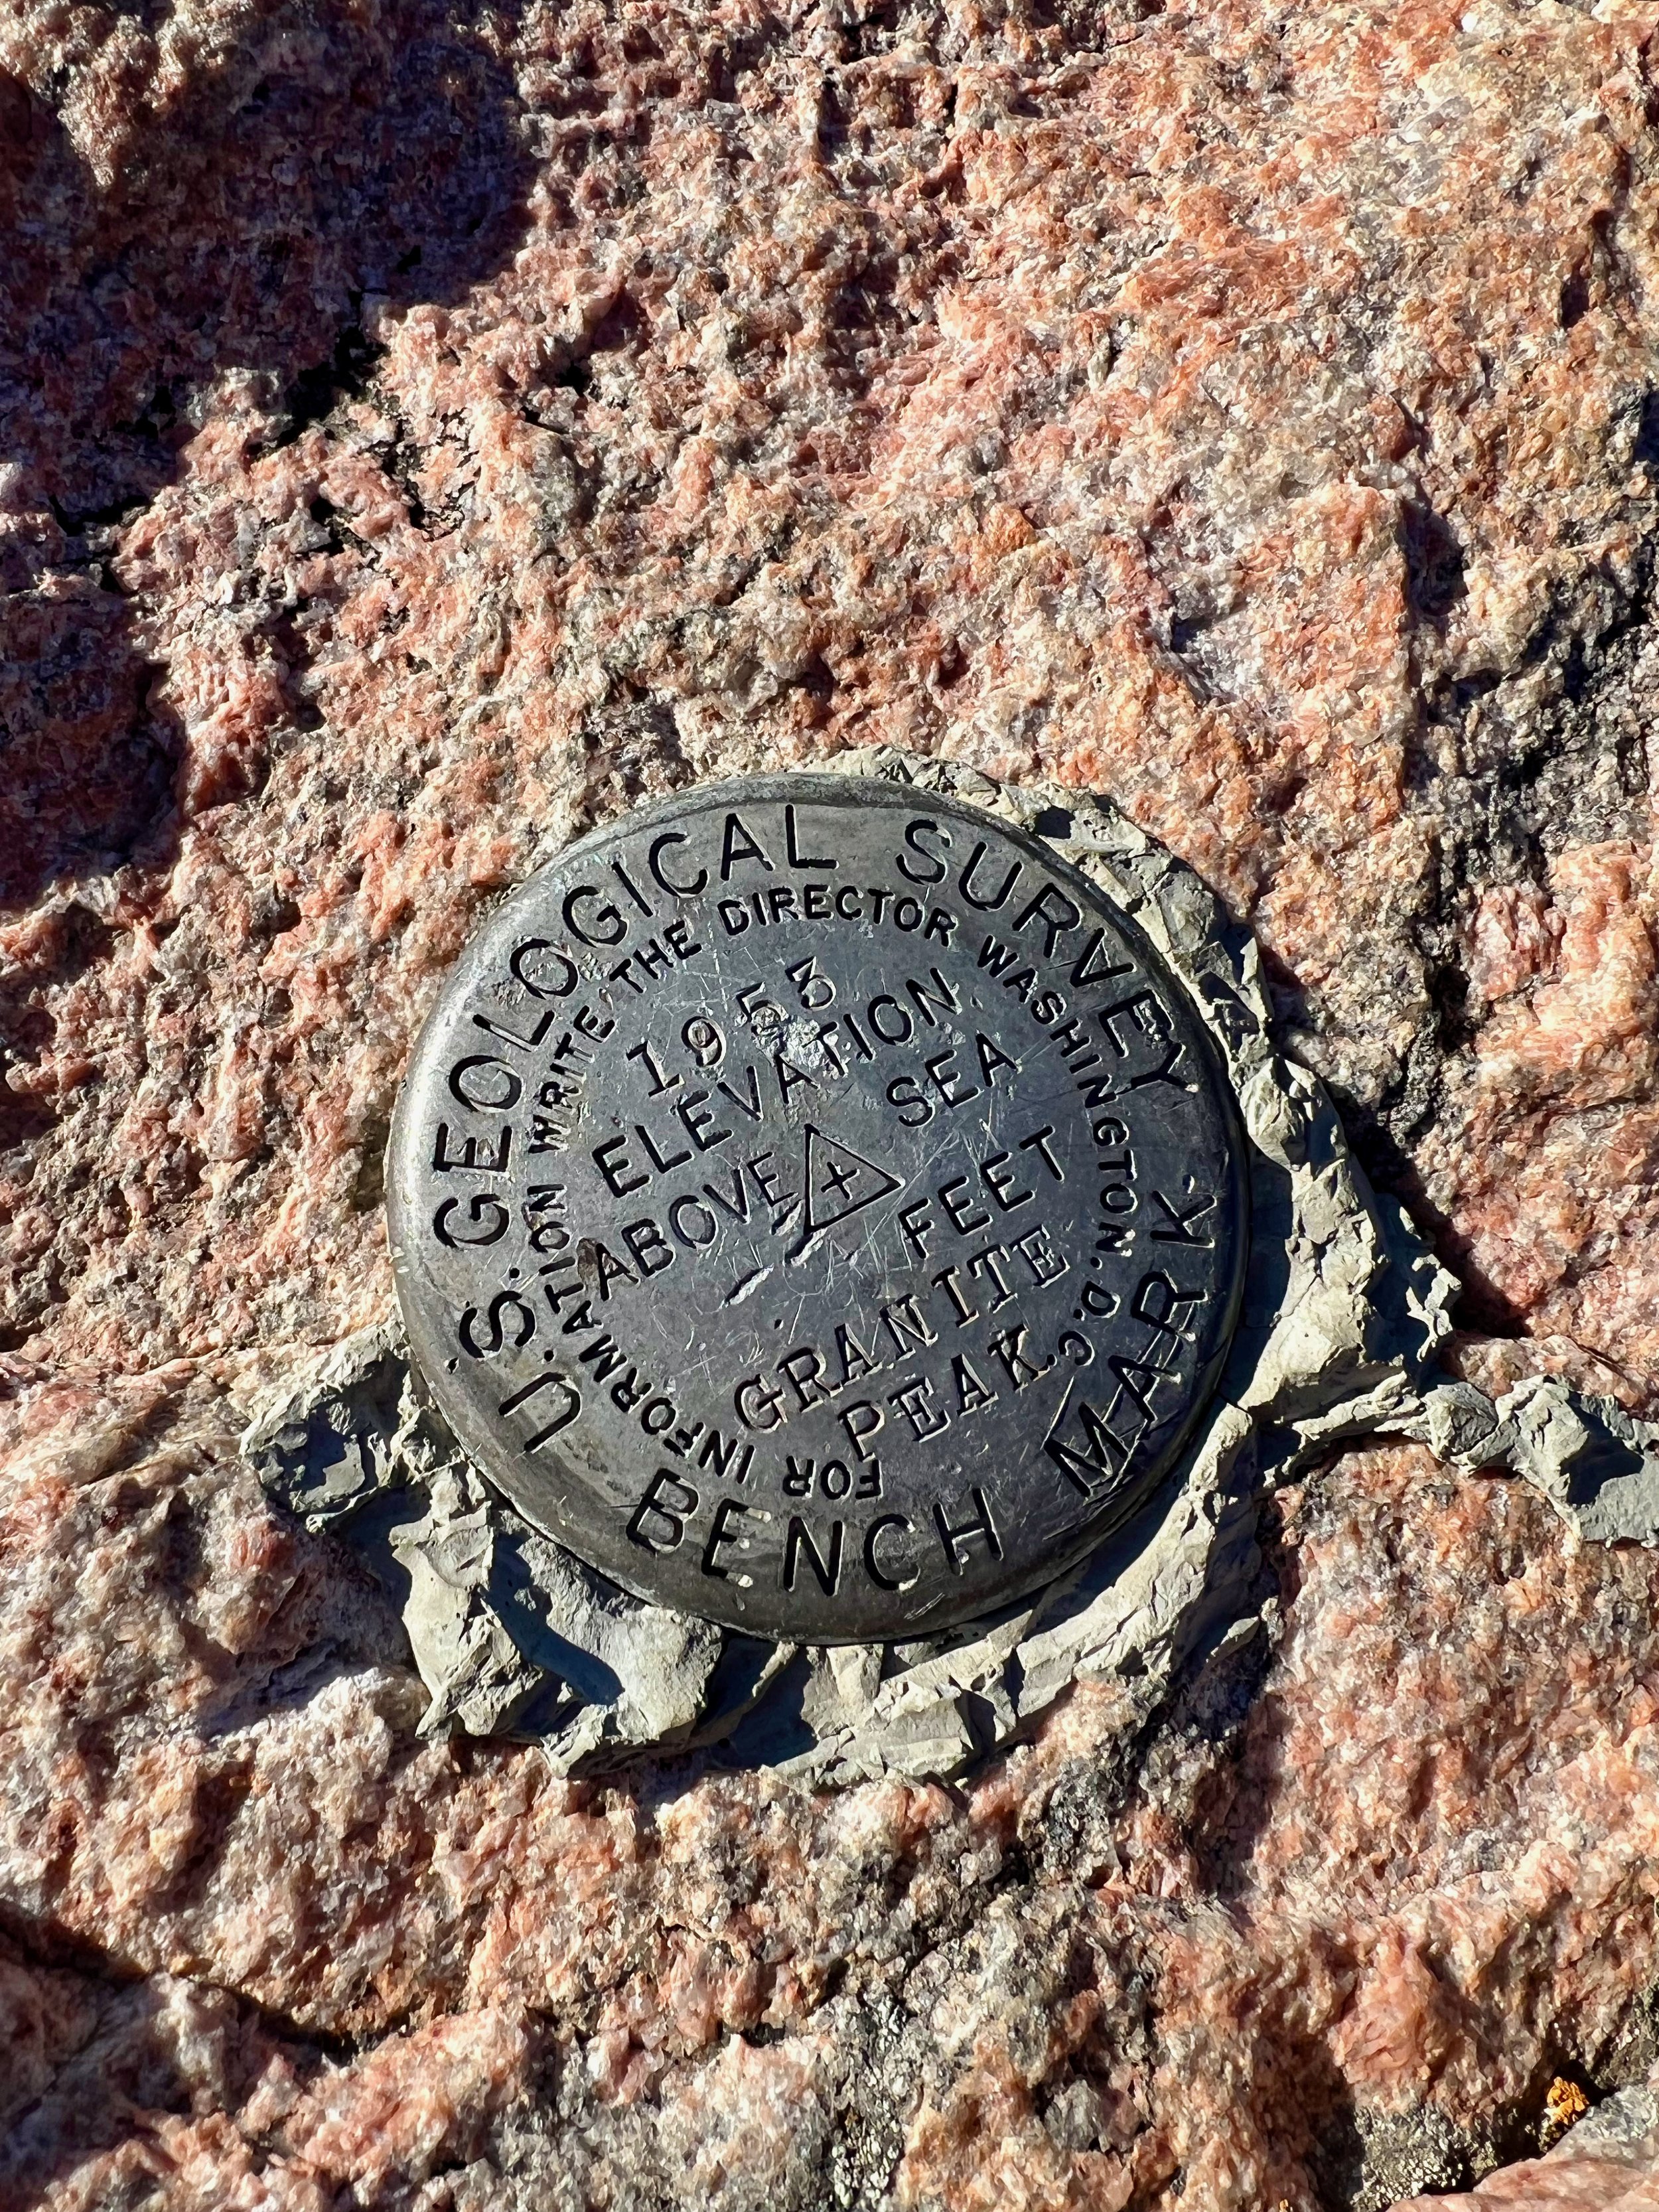 Summit markers don't lie...